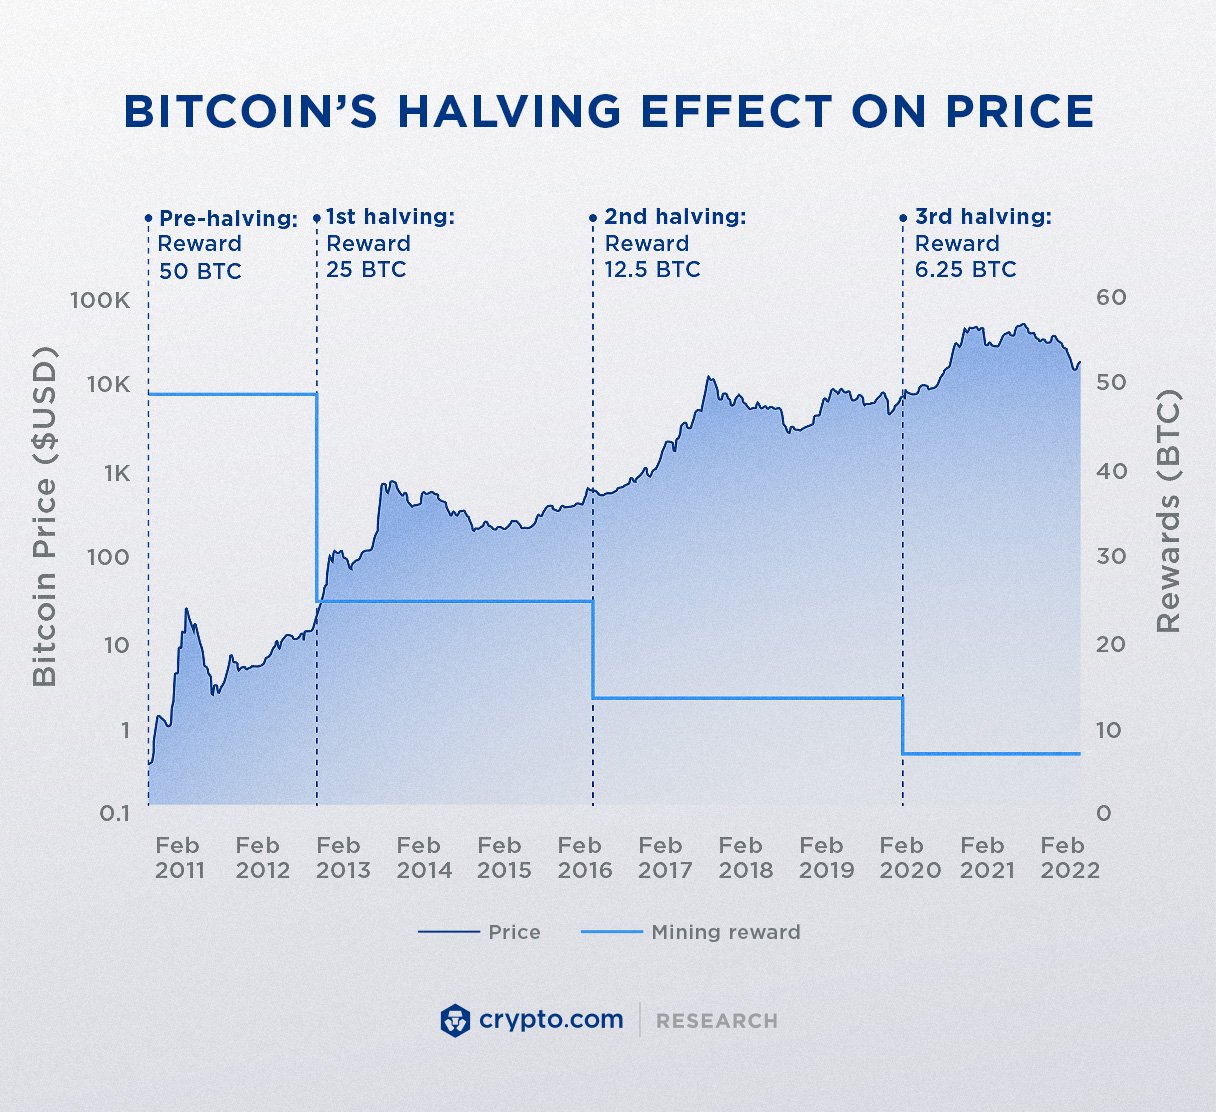 Research_Bitcoin-Halving_effect_on_price_infographic.jpg